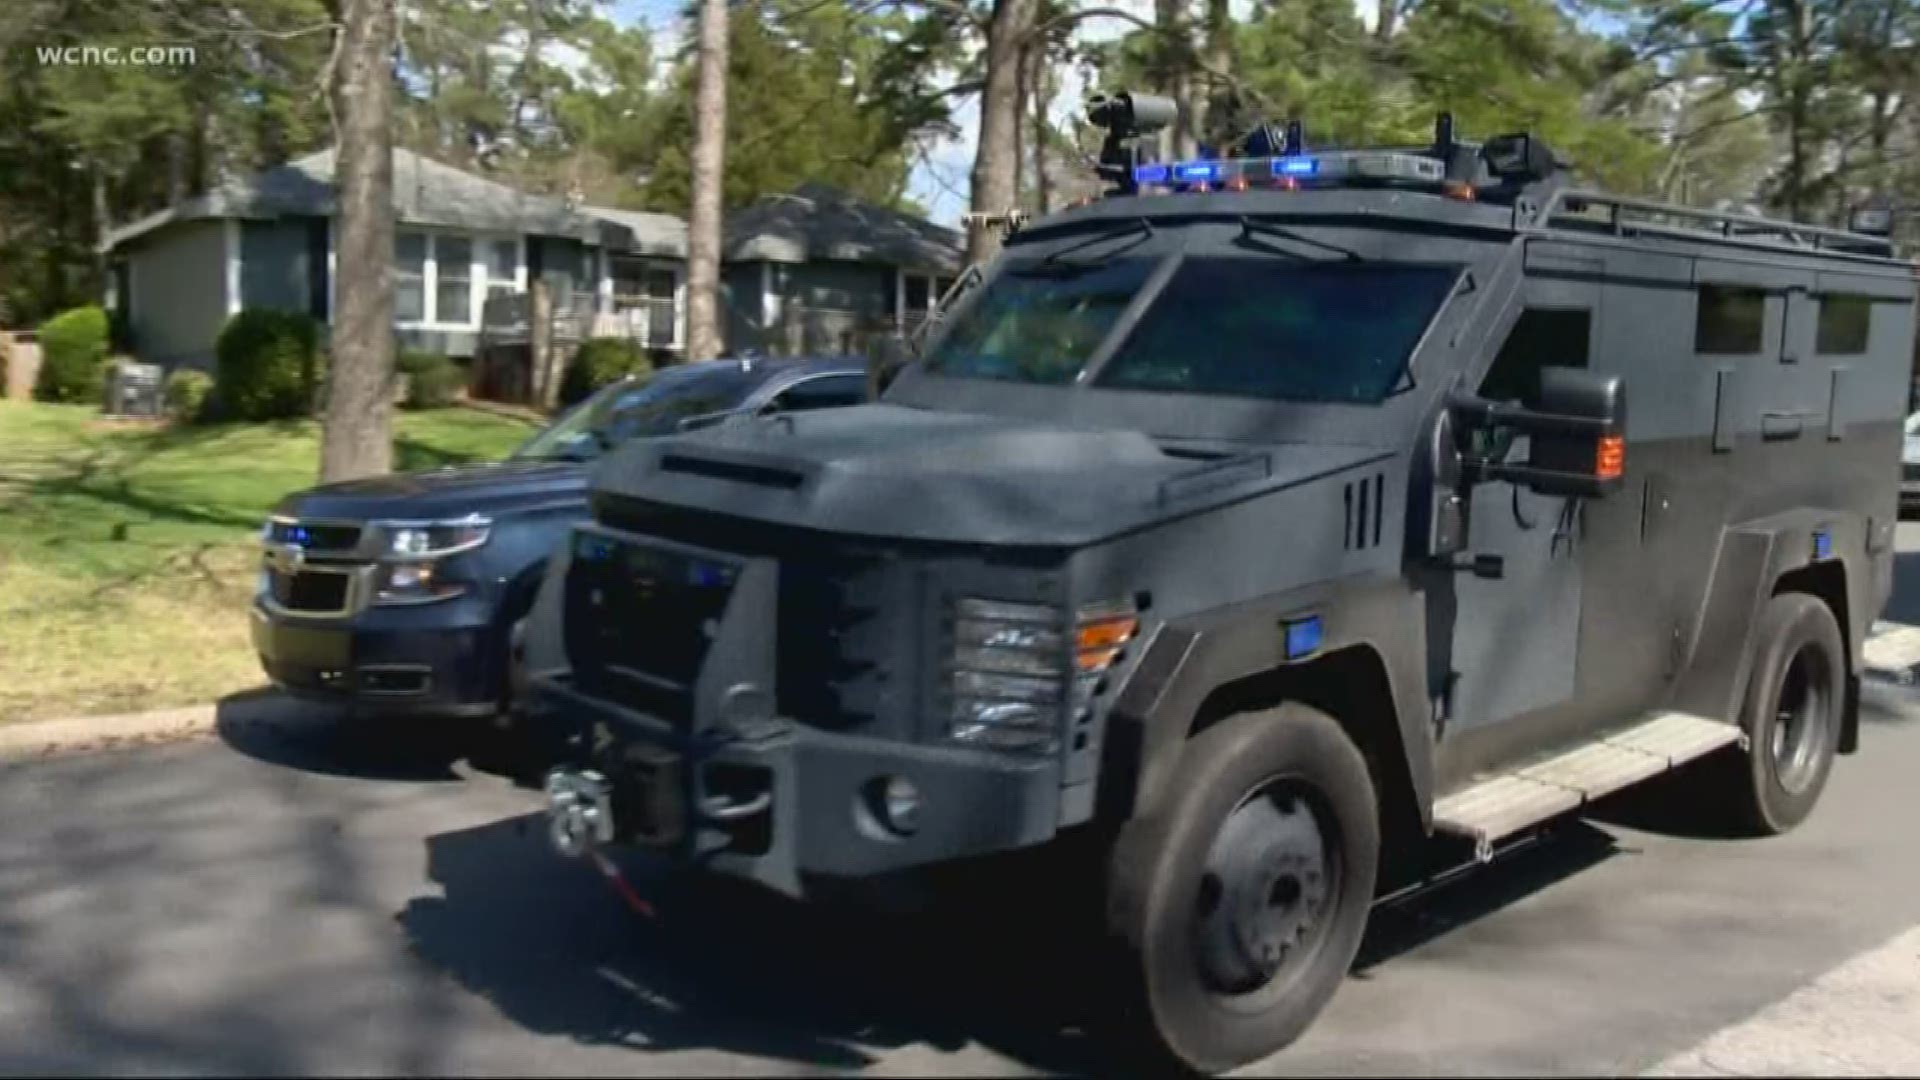 One person, wanted on warrants, is in custody after a standoff with police in Tega Cay Friday, police said.